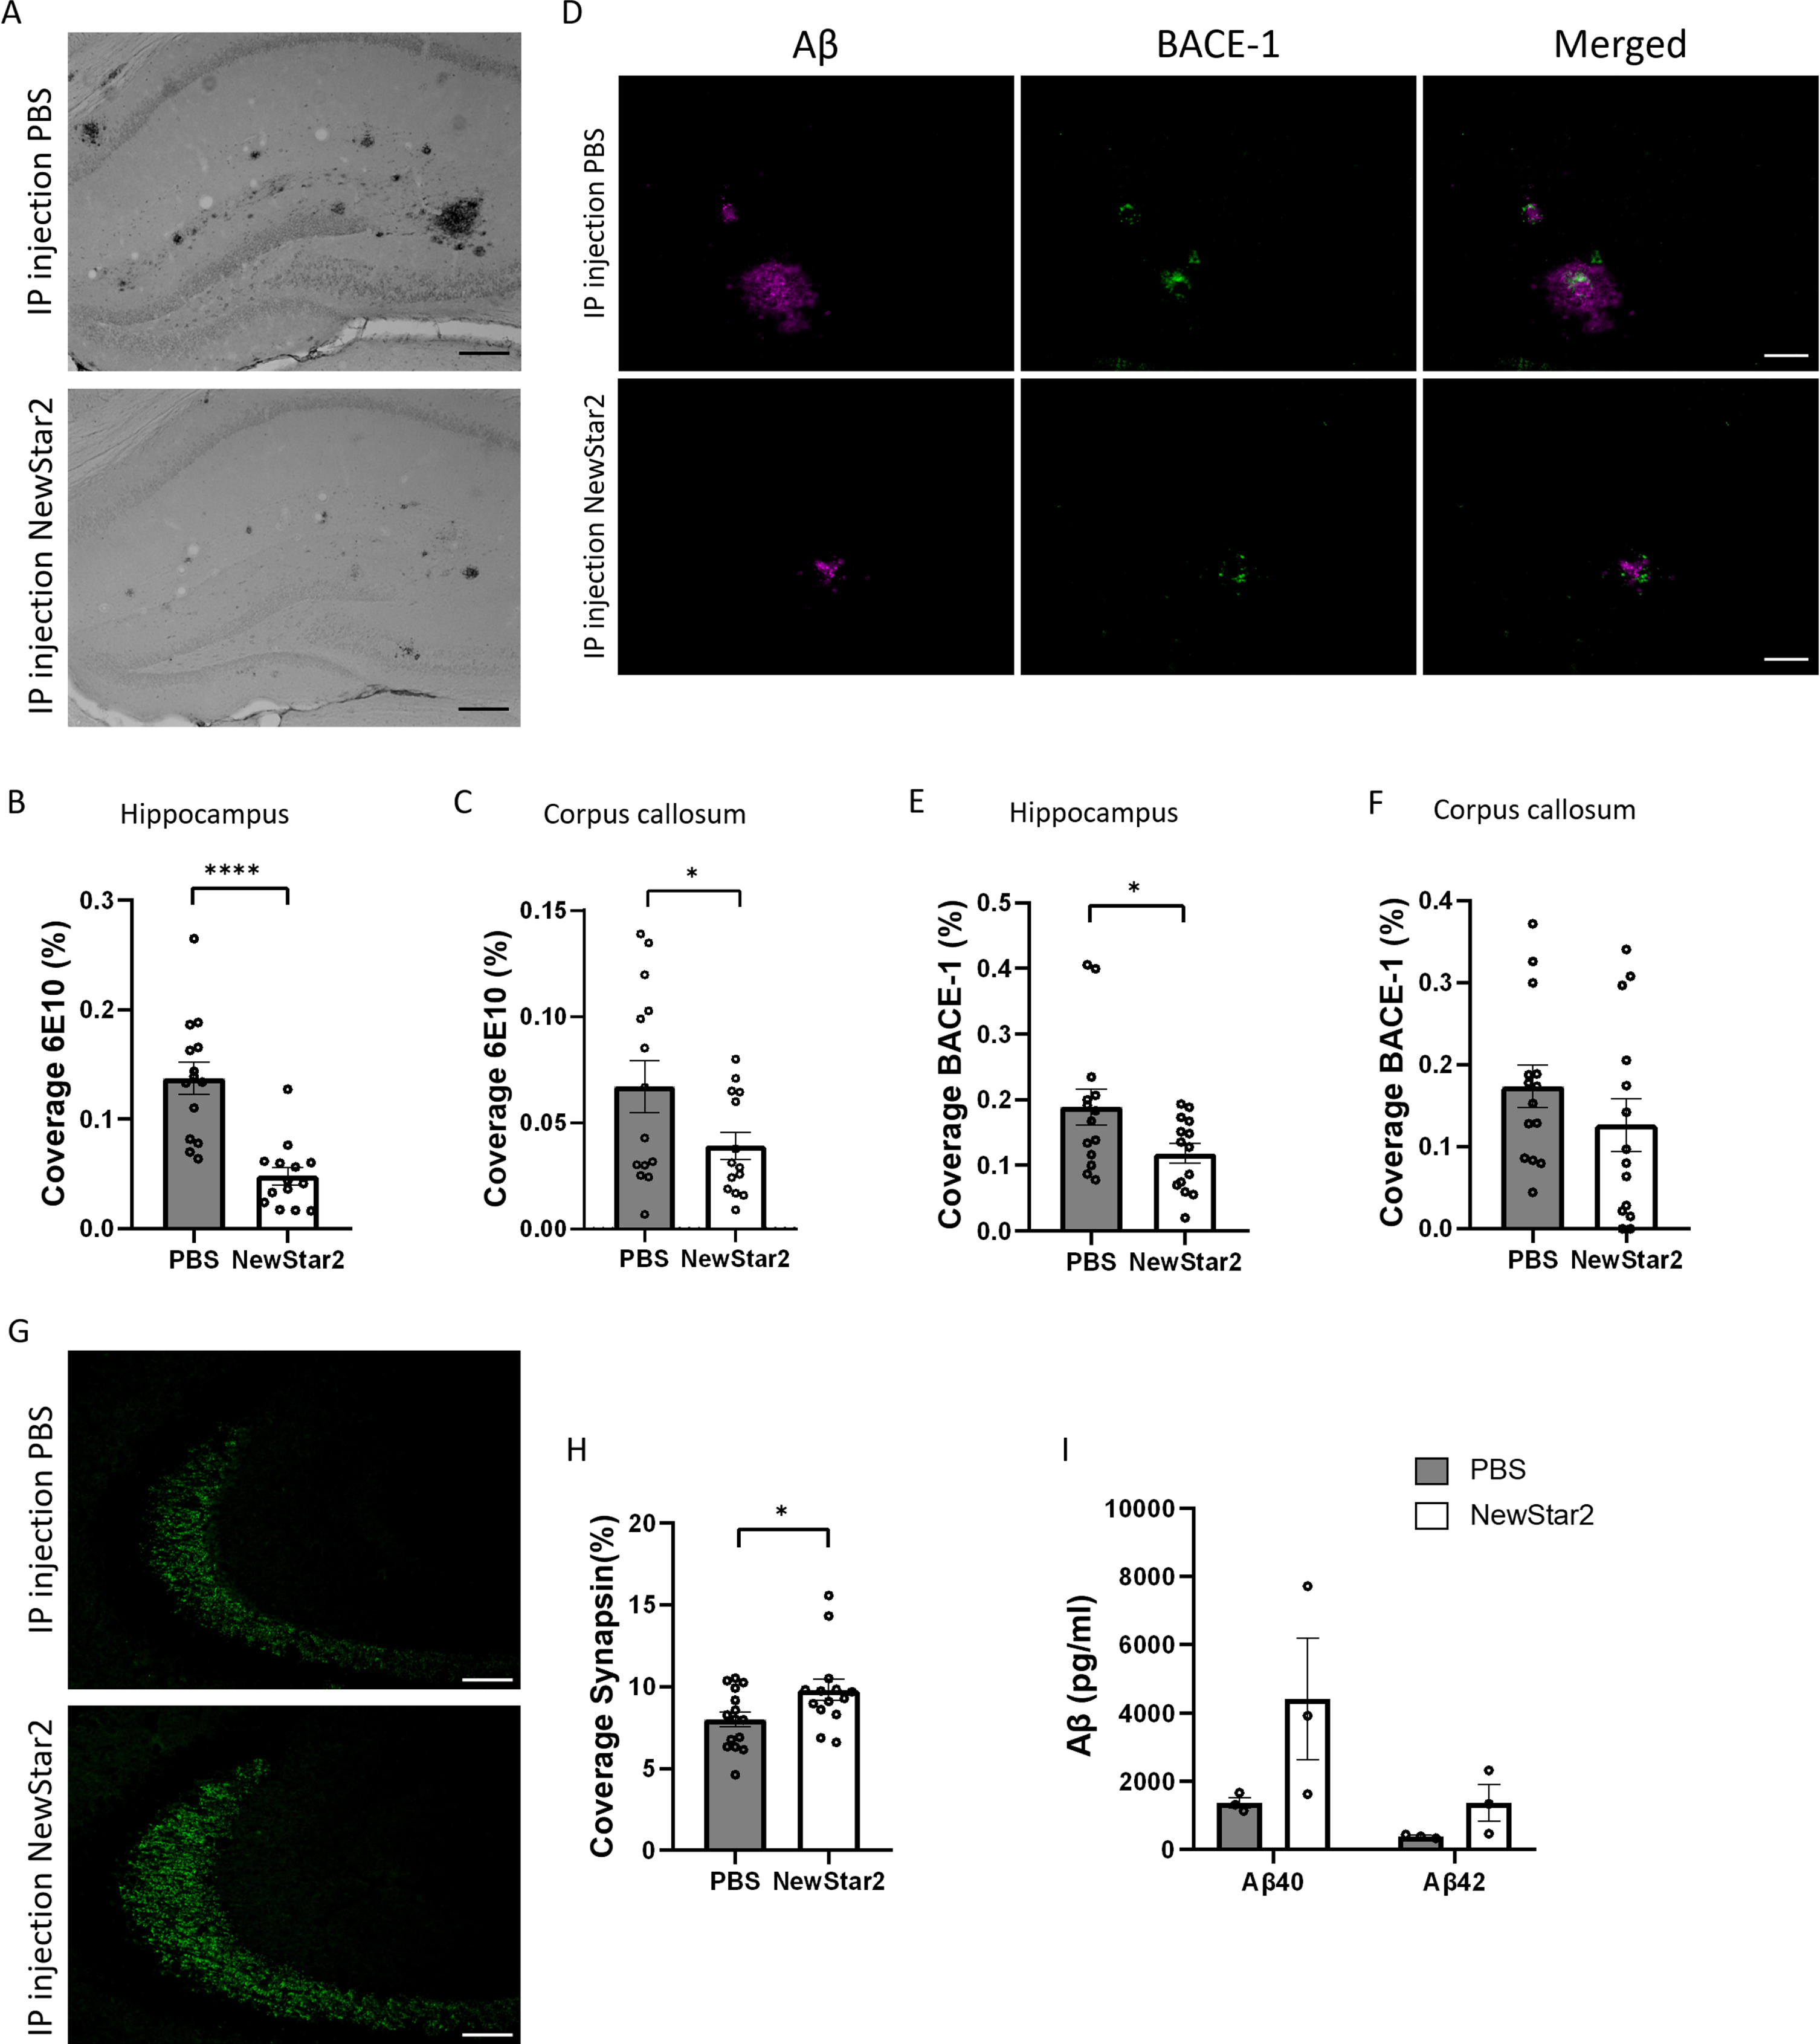 NewStar2 reduces Aβ plaque load and BACE-1 levels, enhances synapsin, and increases Aβ CSF levels. A) Representative hippocampal images of Aβ plaques (6e10) after PBS or NewStar2 administration (Scale bar, 100μm). Quantification of Aβ plaques coverage in hippocampus (B) (PBS, n = 14; NewStar2, n = 14; p < 0.0001; unpaired t-test) and corpus callosum (C) (PBS, n = 14; NewStar2, n = 14; p = 0.049; unpaired t-test). D) Sections were stained with 6e10 (magenta) for Aβ and anti-BACE-1 (green) for β-secretase BACE-1. Representative images of hippocampus are shown (Scale bar, 100μm). Quantification of BACE-1 coverage in hippocampus (E) (PBS, n = 14; NewStar2, n = 14; p = 0.031; unpaired t-test) and corpus callosum (F) (PBS, n = 14; NewStar2, n = 14; p = 0.26; unpaired t-test). G) Representative hippocampal images of synapsin 1 (green) after PBS or NewStar2 administration (Scale bar, 100μm). H) Quantification of synapsin 1 coverage in hippocampus (PBS, n = 14; NewStar2, n = 14; p = 0.032; unpaired t-test). I) Quantification (pg/ml) of Aβ40 and Aβ42 levels in CSF (PBS, n = 3; NewStar2, n = 3; p = 0.062; two-way ANOVA, Bonferroni post hoc analysis). Data are presented as mean±SEM. *p < 0.05; ****p < 0.0001.